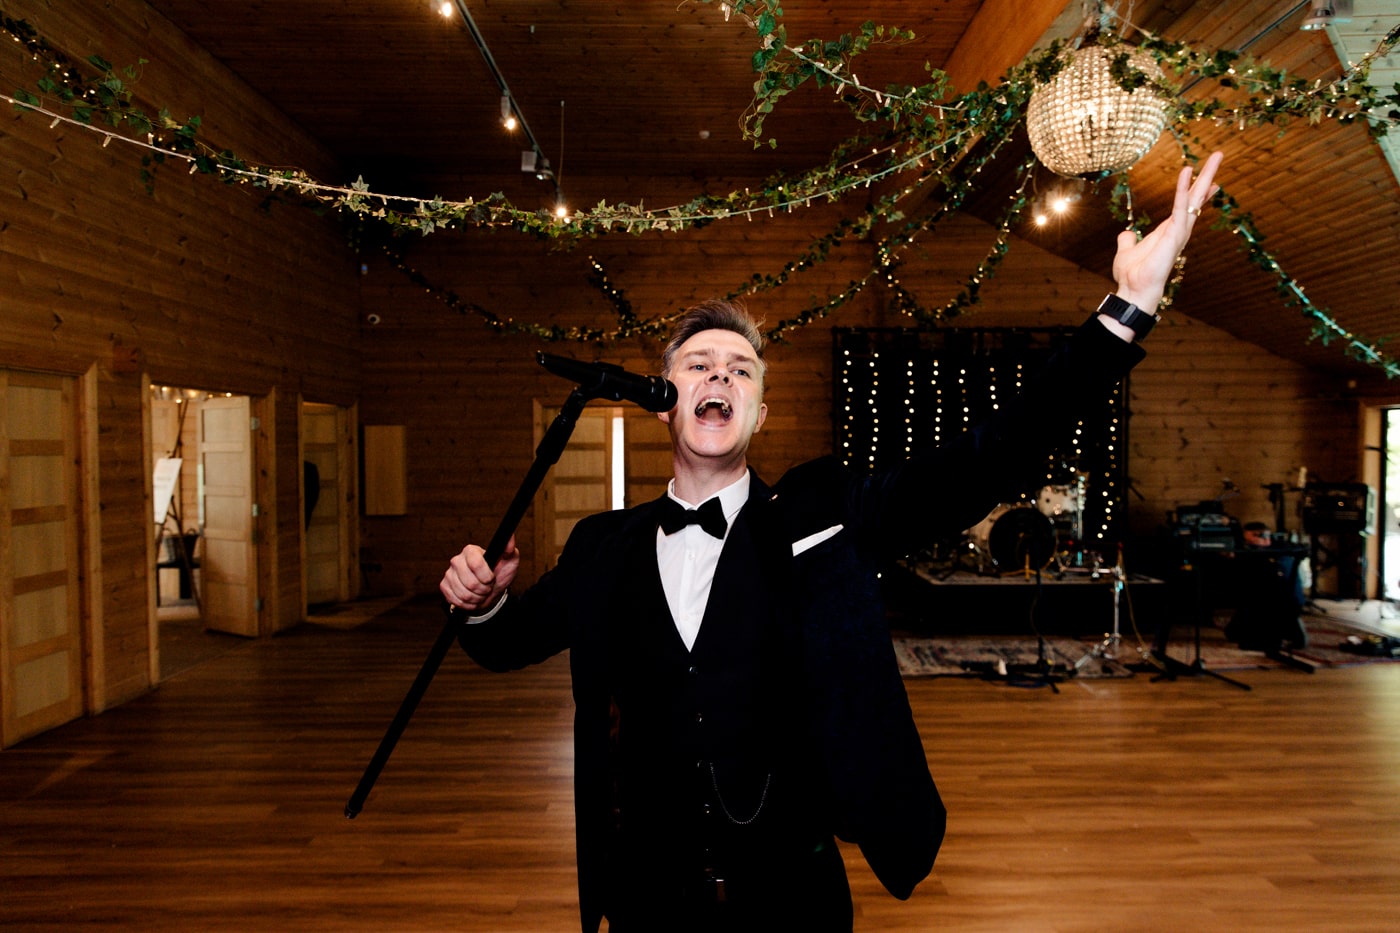 tom finkill the dj at styal lodge during your wedding breakfast